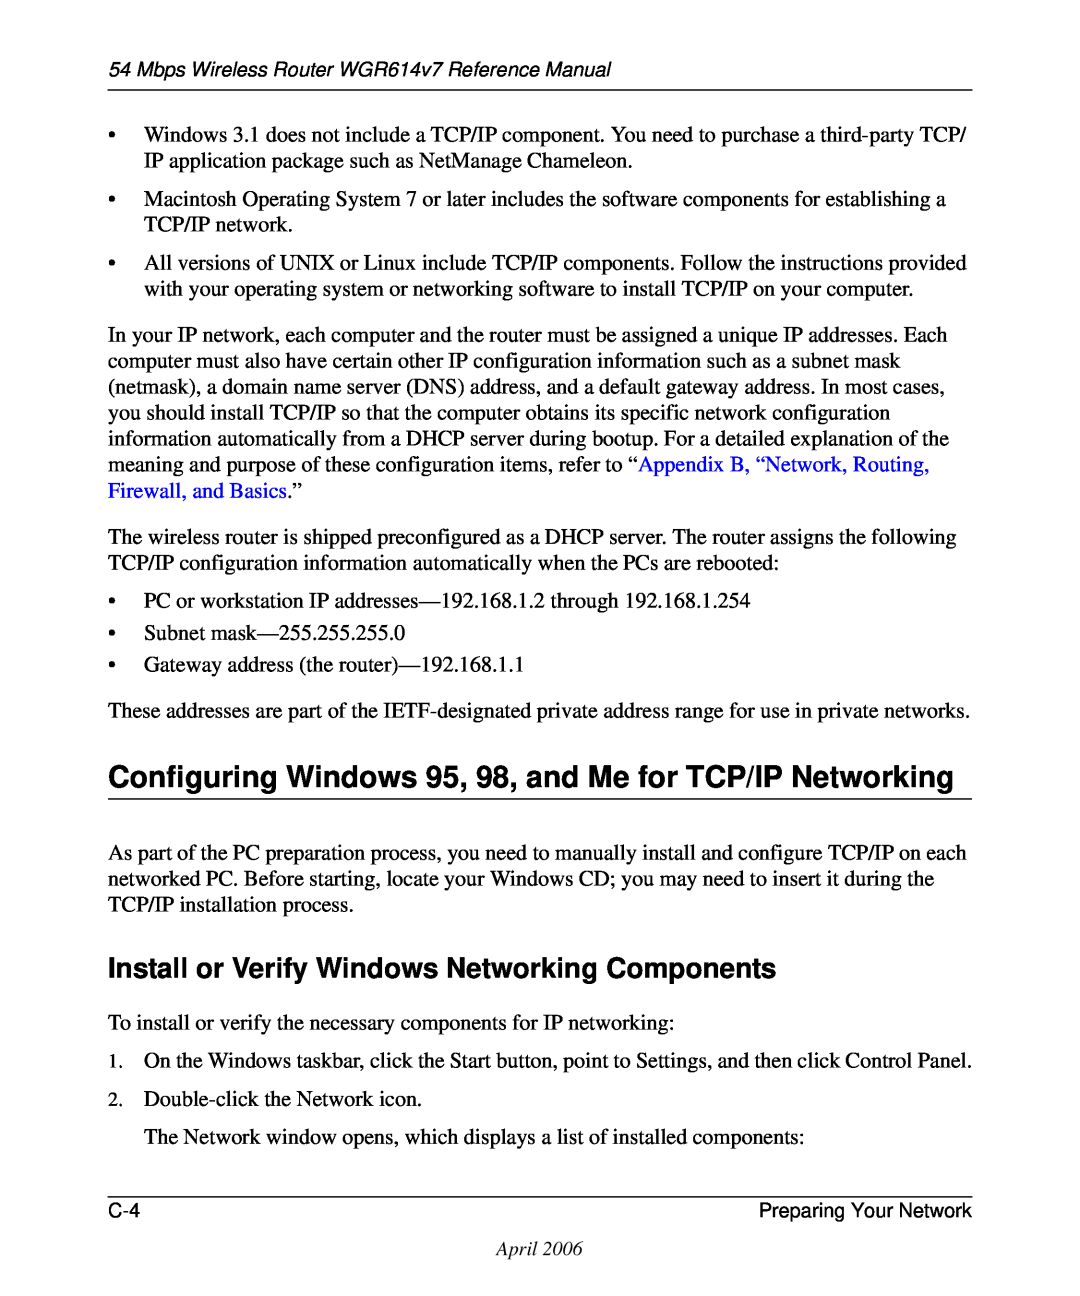 NETGEAR WGR614v7 Configuring Windows 95, 98, and Me for TCP/IP Networking, Install or Verify Windows Networking Components 